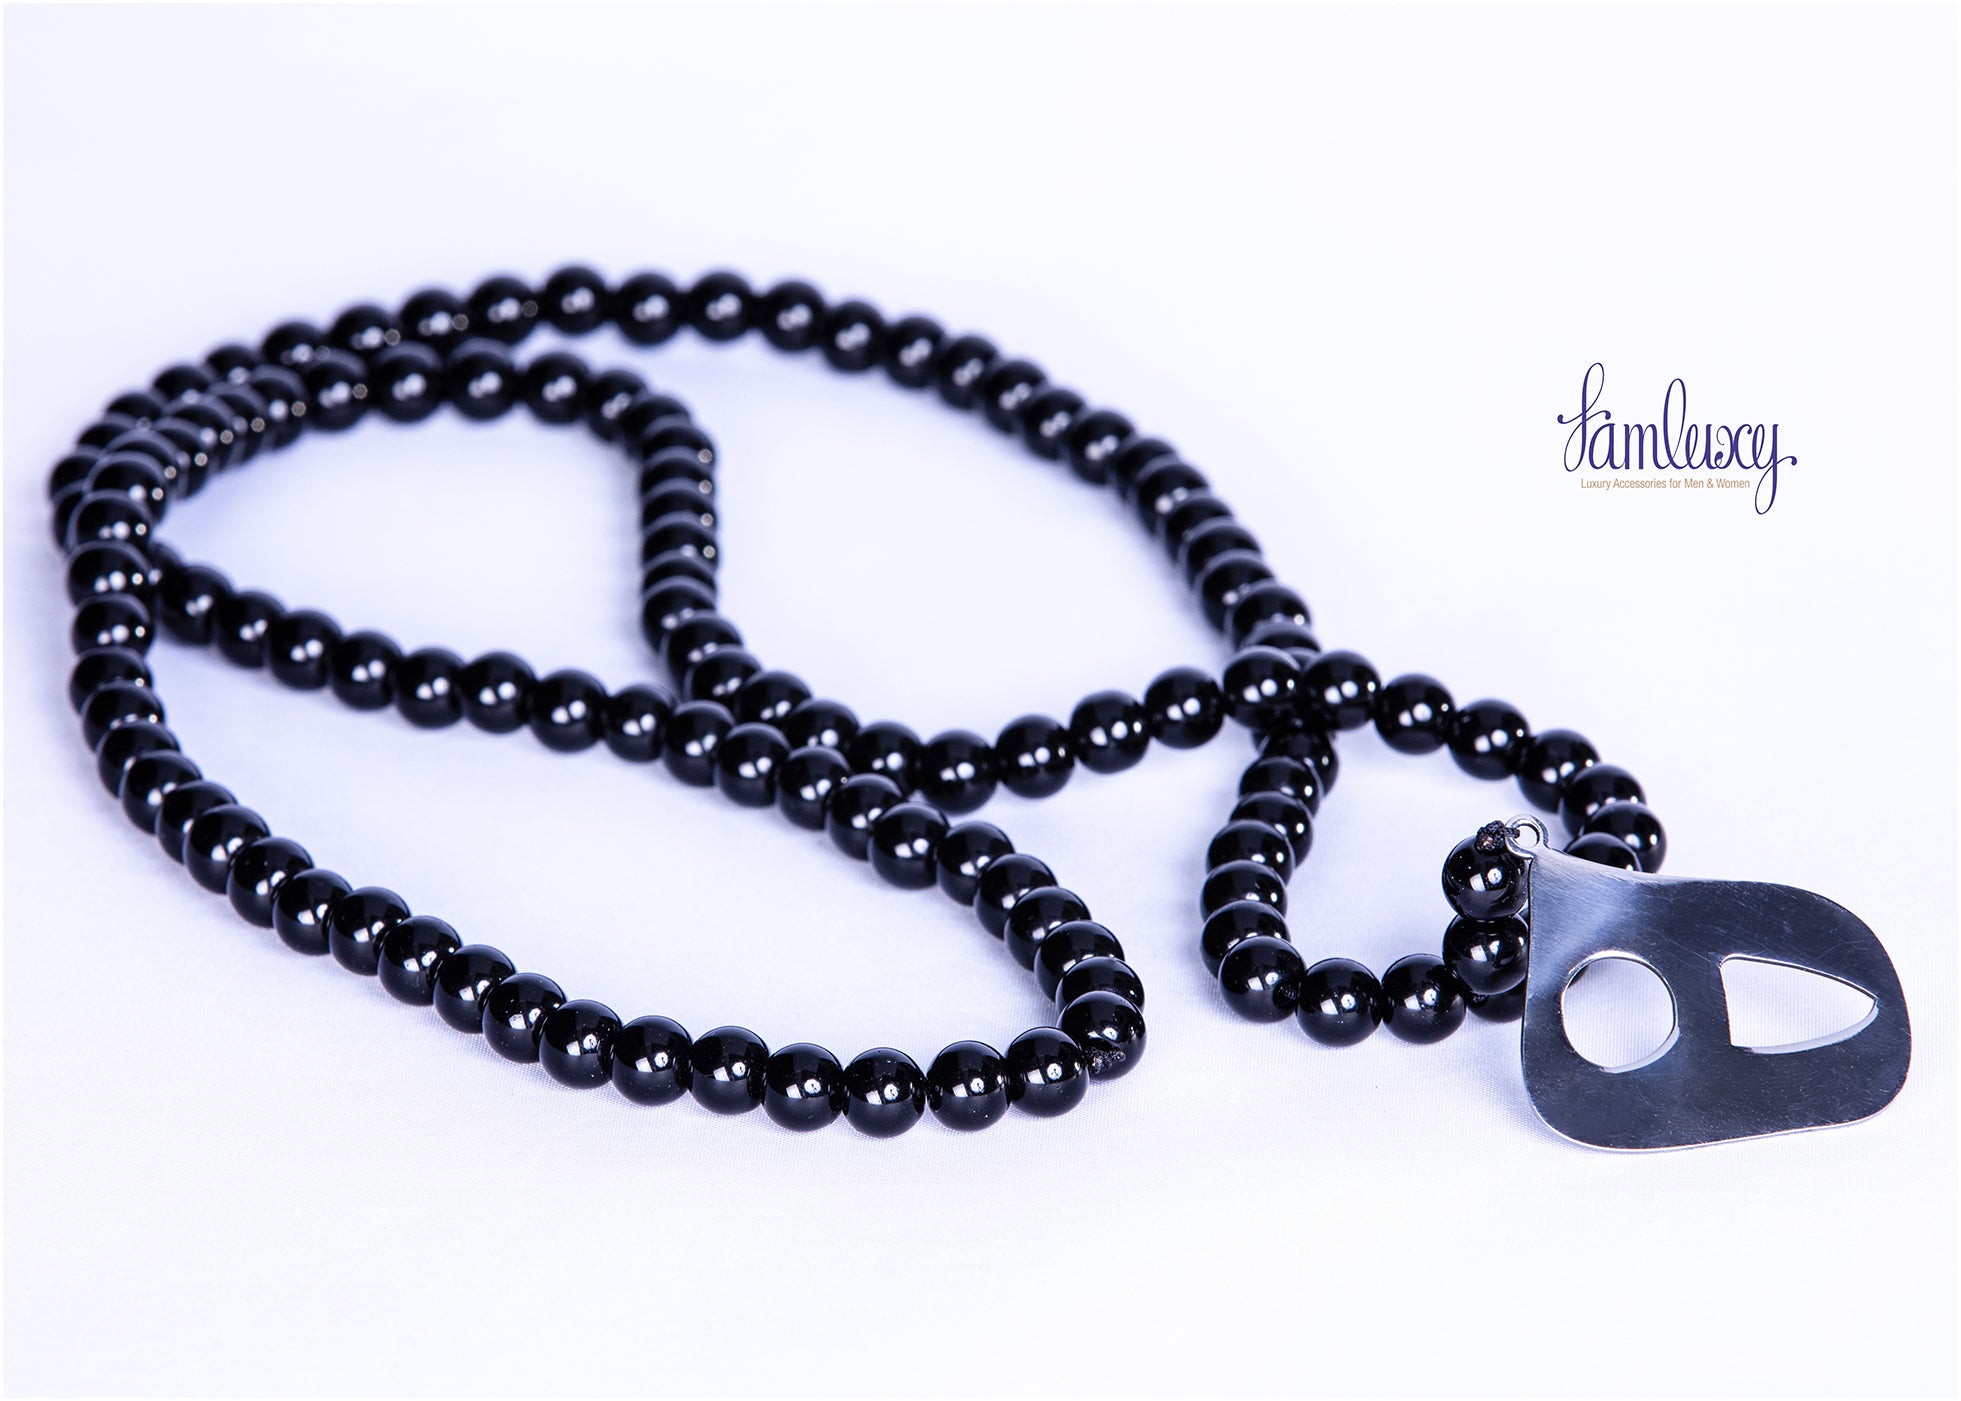 Handmade Natural Stone Long Necklace (Onyx) with silver calligraphy pendent